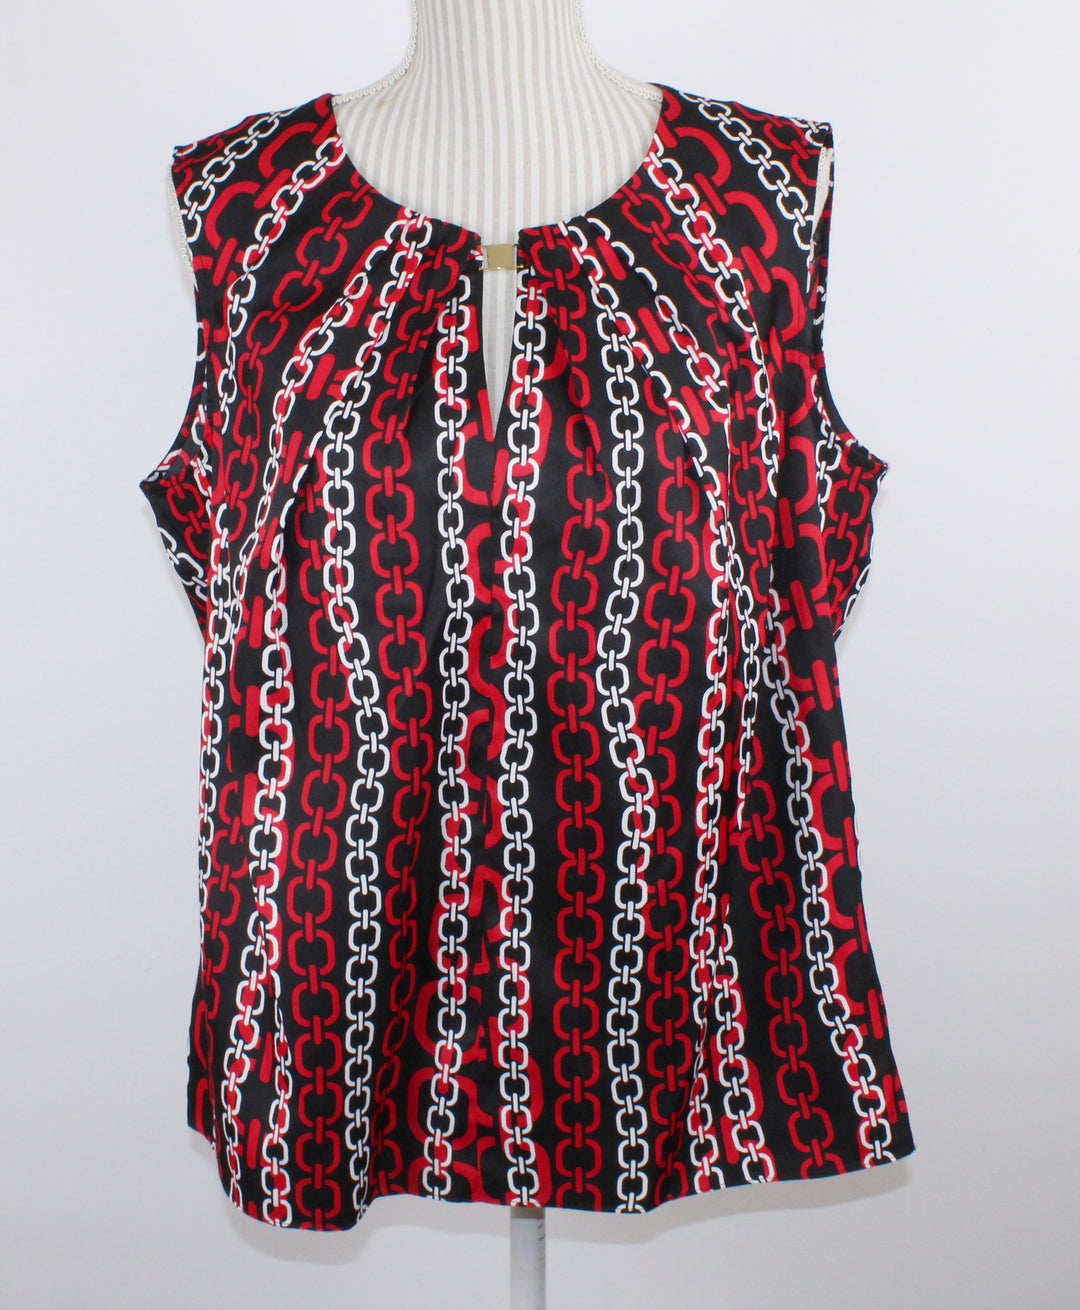 JONES NY RED CHAINLINK BLOUSE LADIES SIZE 14 NEW!